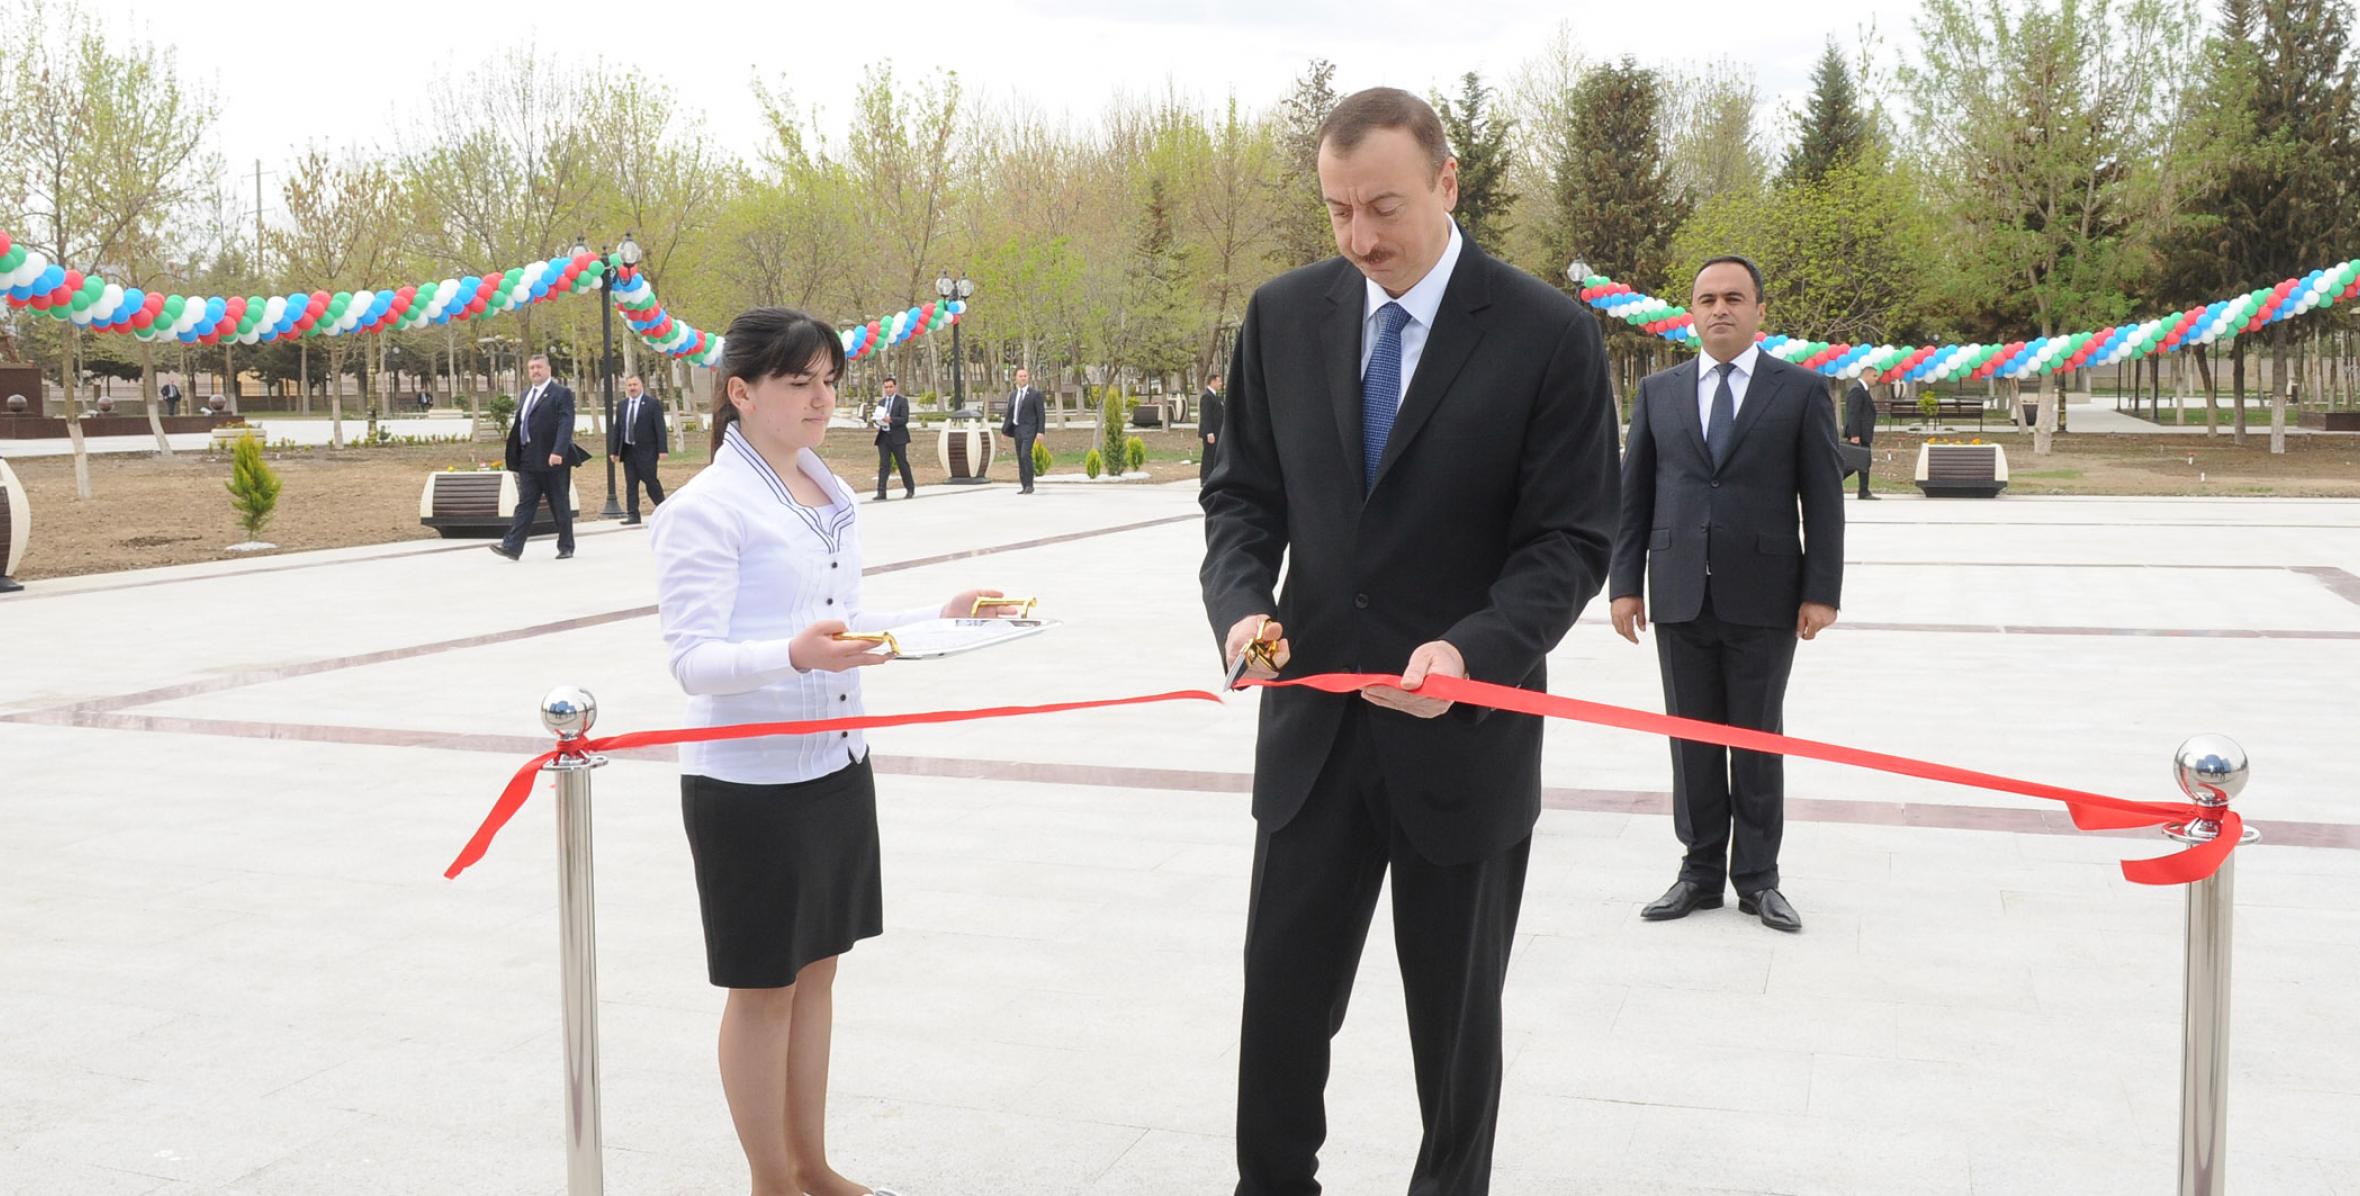 Ilham Aliyev attended the opening of a Youth Center in Agstafa